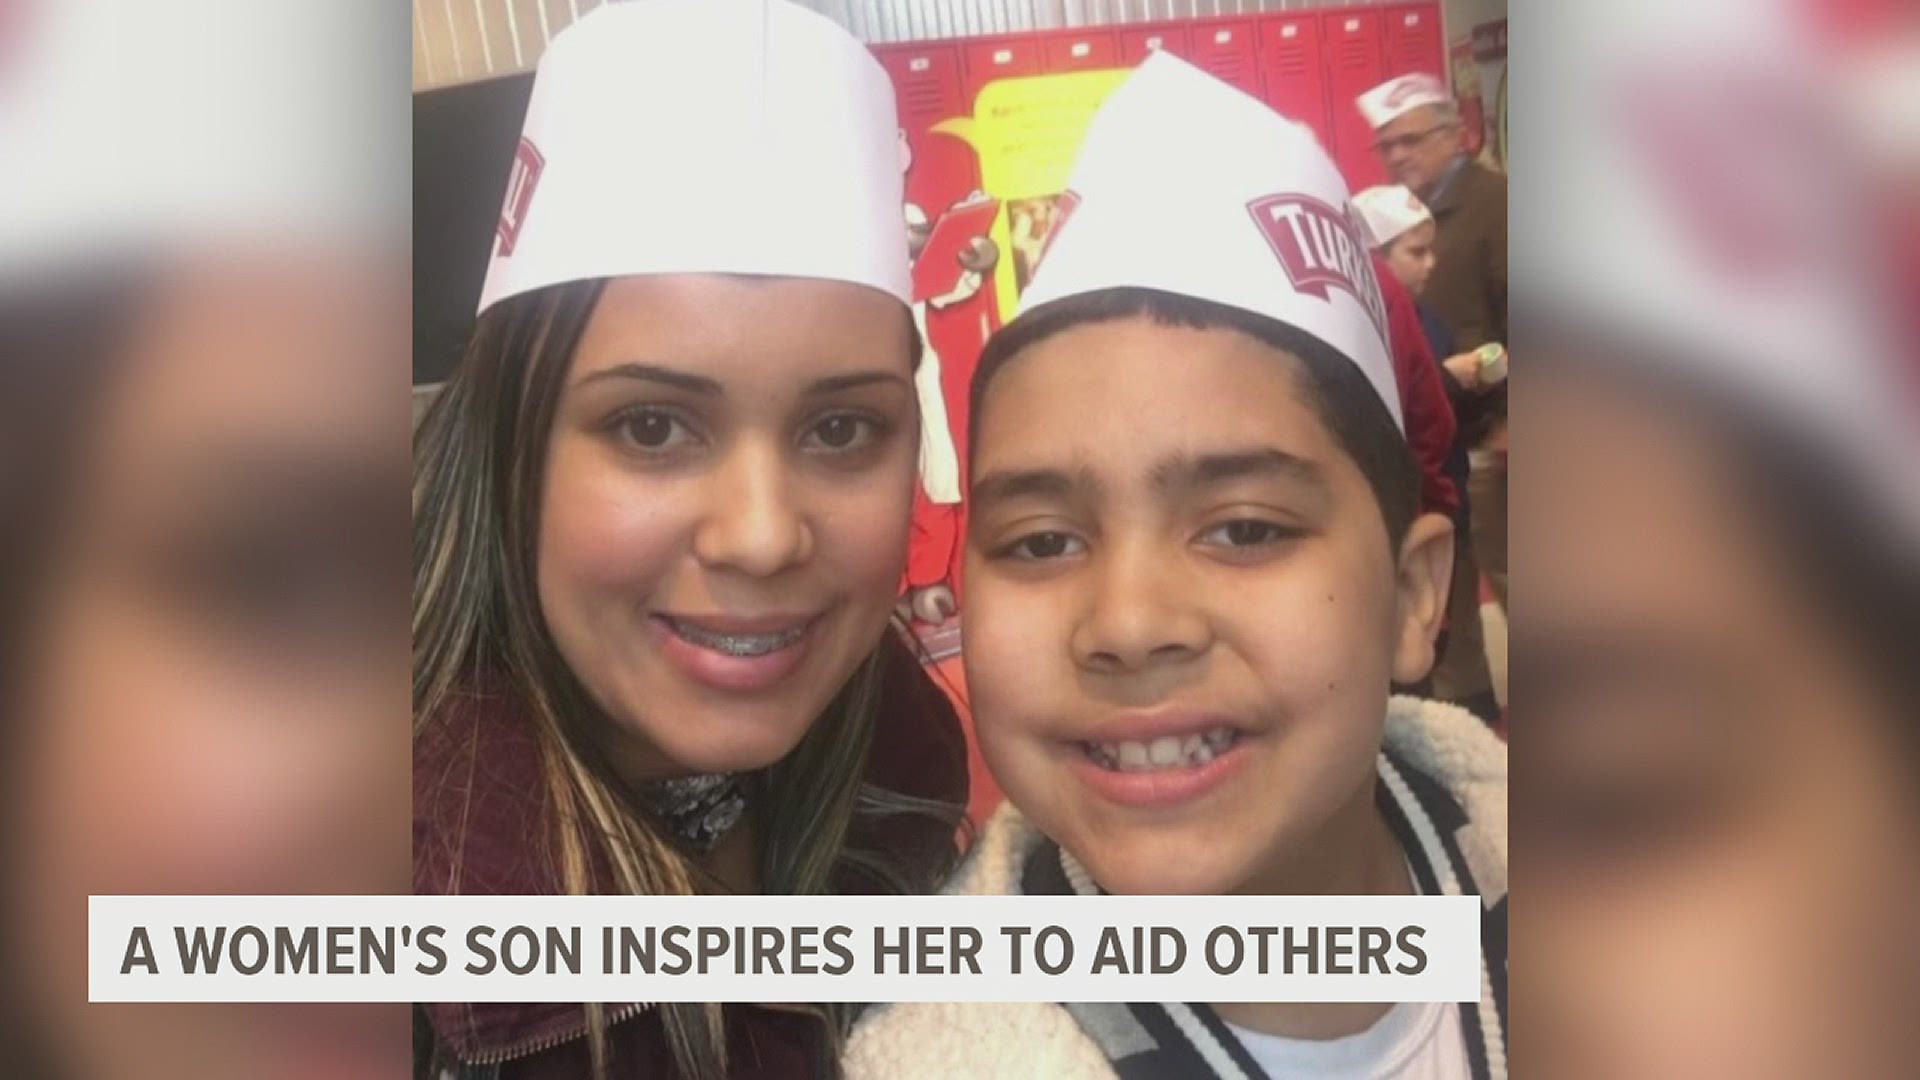 A woman's son inspires her to aid others